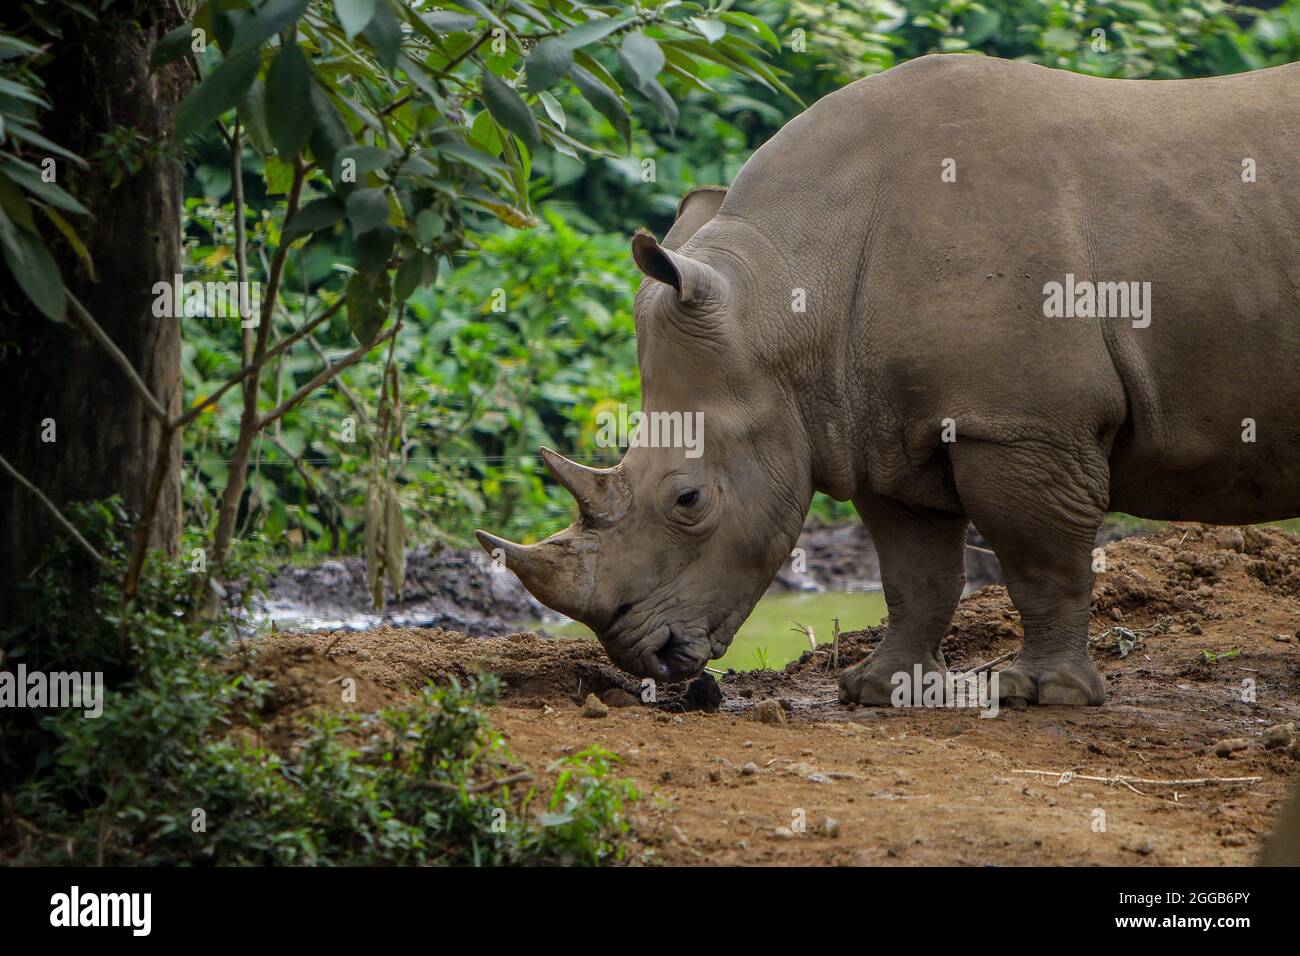 A White rhino seen at Safari Park zoo in Bogor, West Java, Indonesia on August 29, 2021. (Photo by Adriana Adie/INA Photo Agency/Sipa USA) Stock Photo